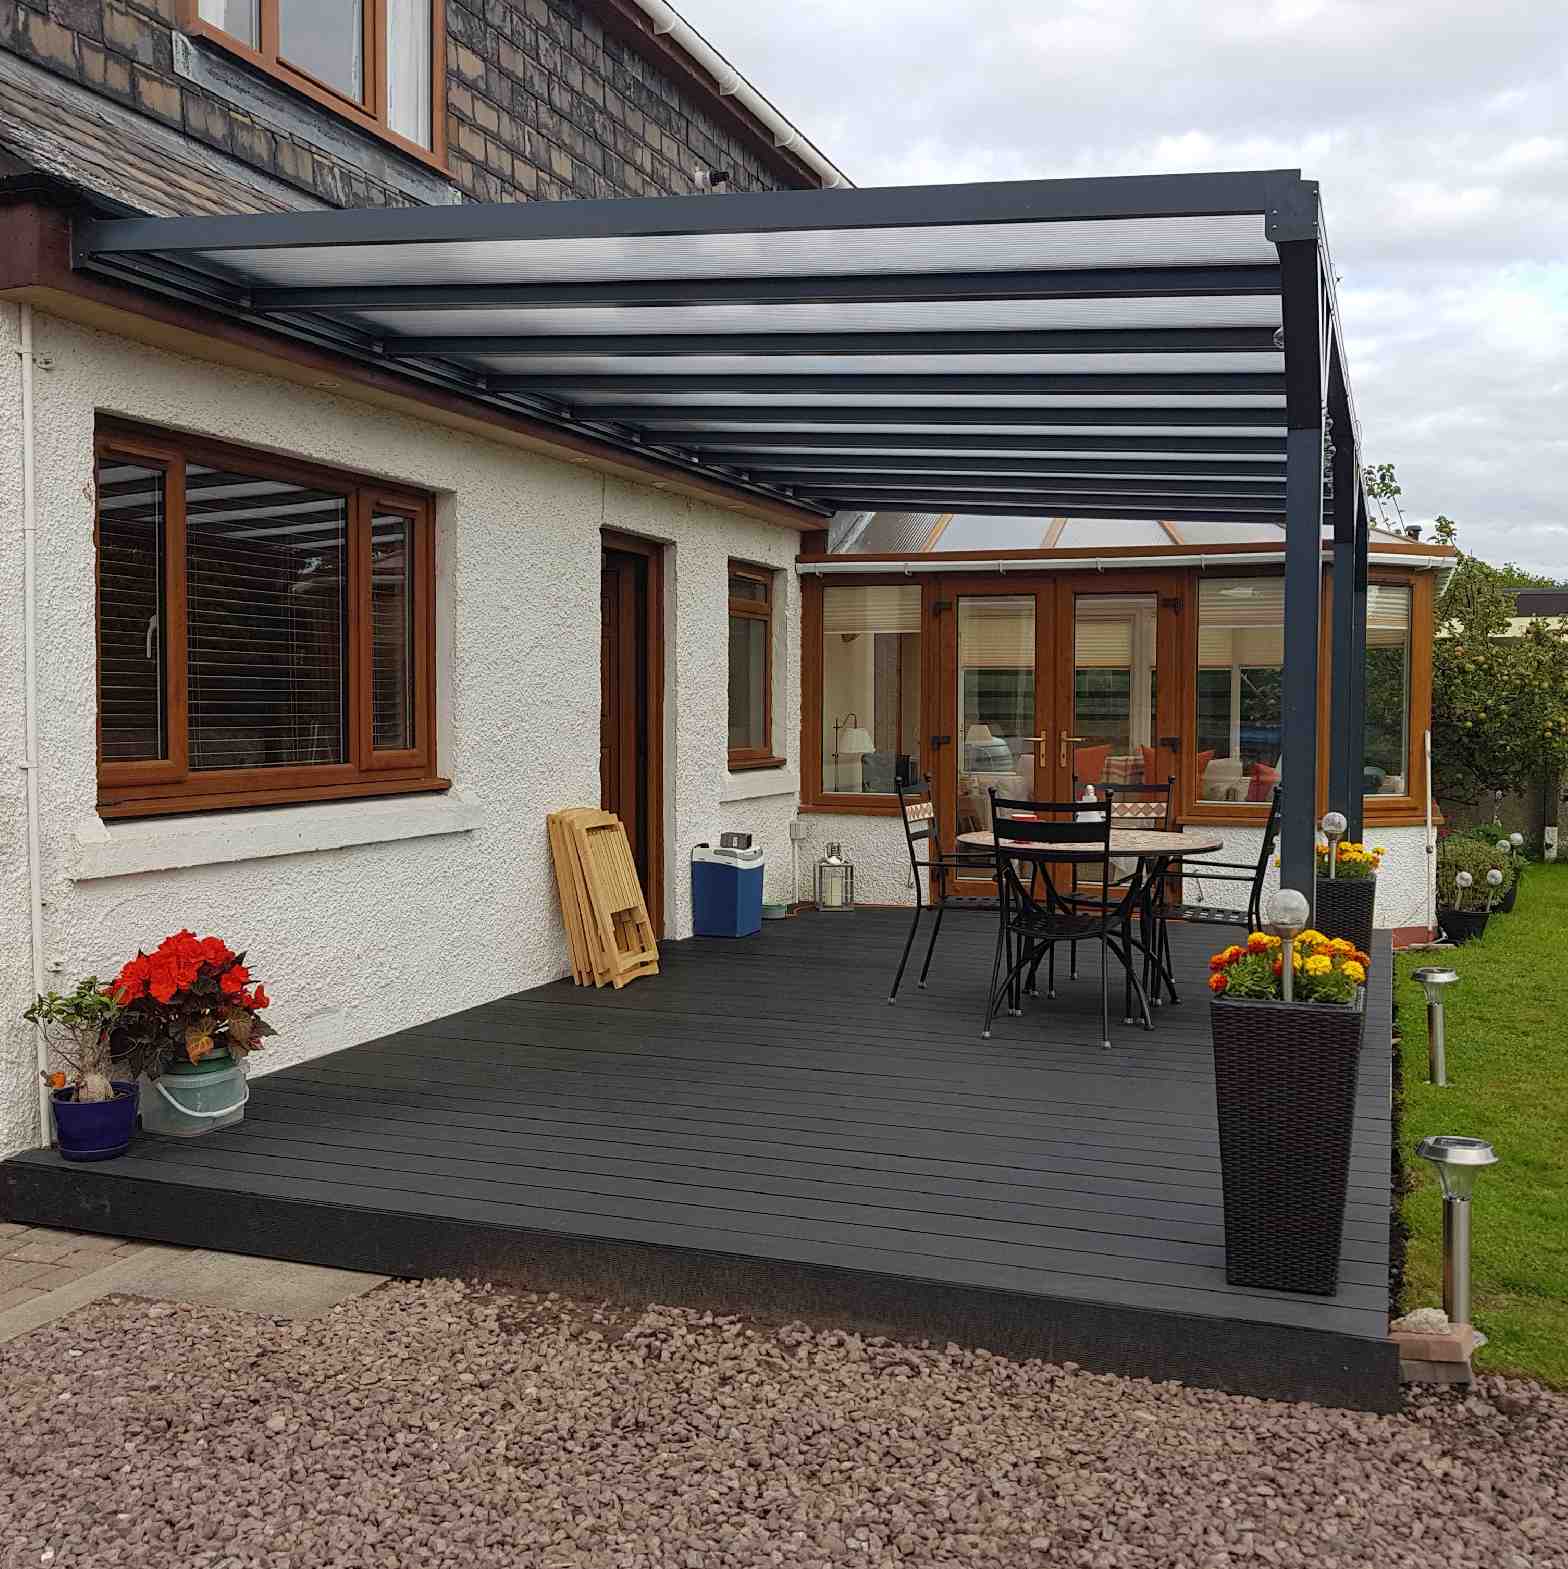 Buy Omega Verandah, Anthracite Grey, 16mm Polycarbonate Glazing - 12.0m (W) x 1.5m (P), (5) Supporting Posts online today